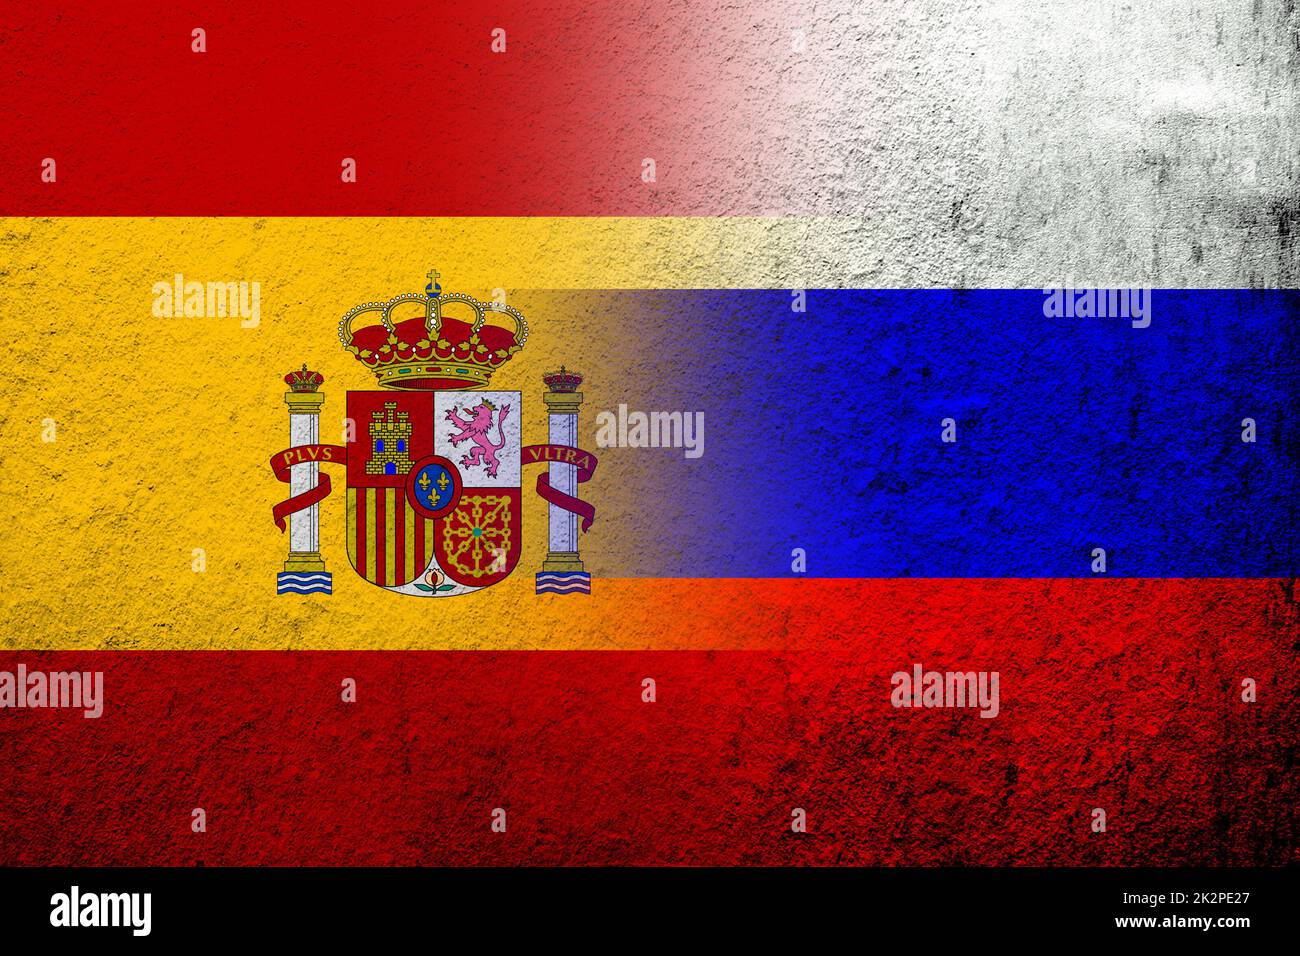 National flag of Russian Federation with Kingdom of Spain National flag. Grunge background Stock Photo